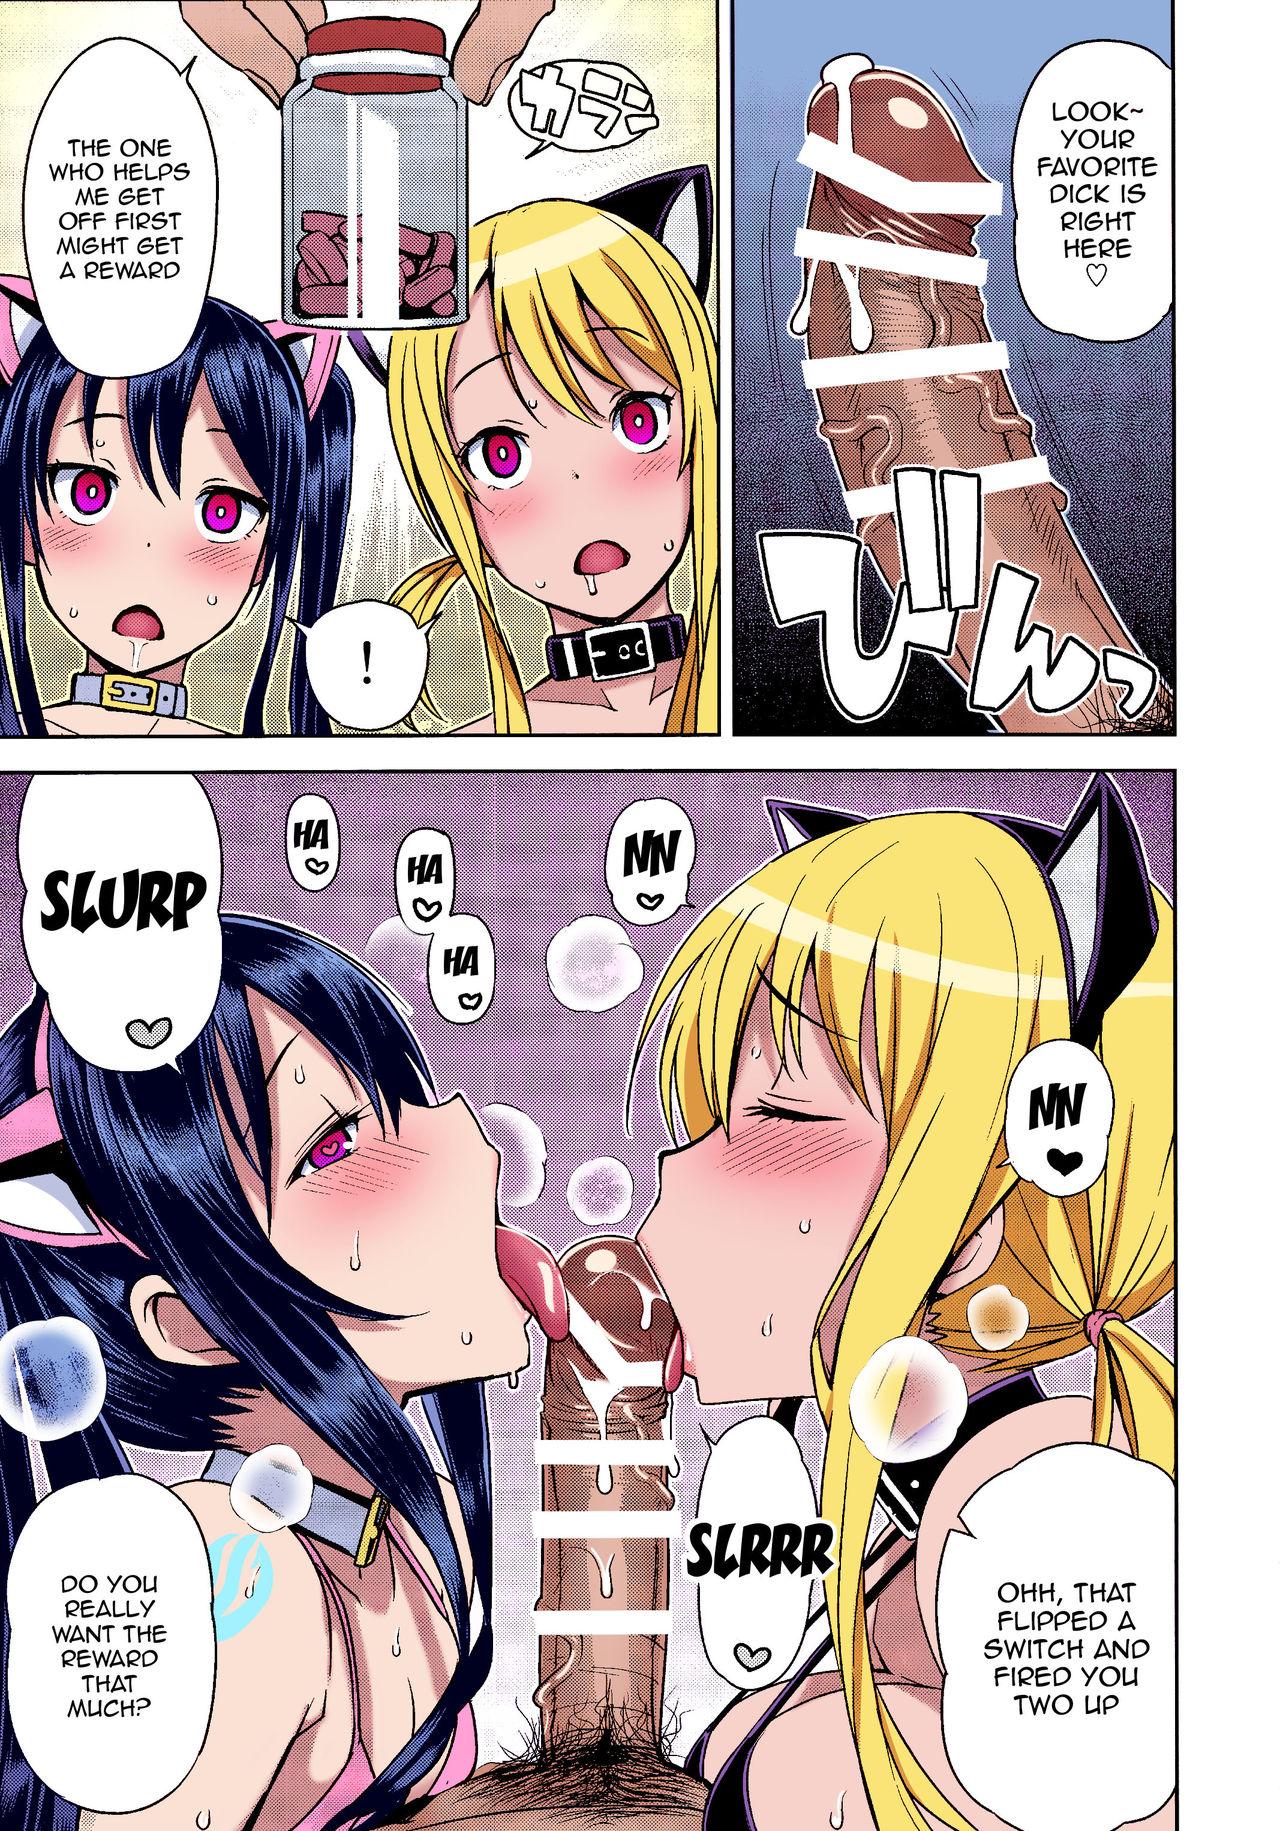 Perfect Butt Chichikko Bitch 2 - Witch Bitch Collection Vol.1 VERSION - Fairy tail Cumming - Page 4